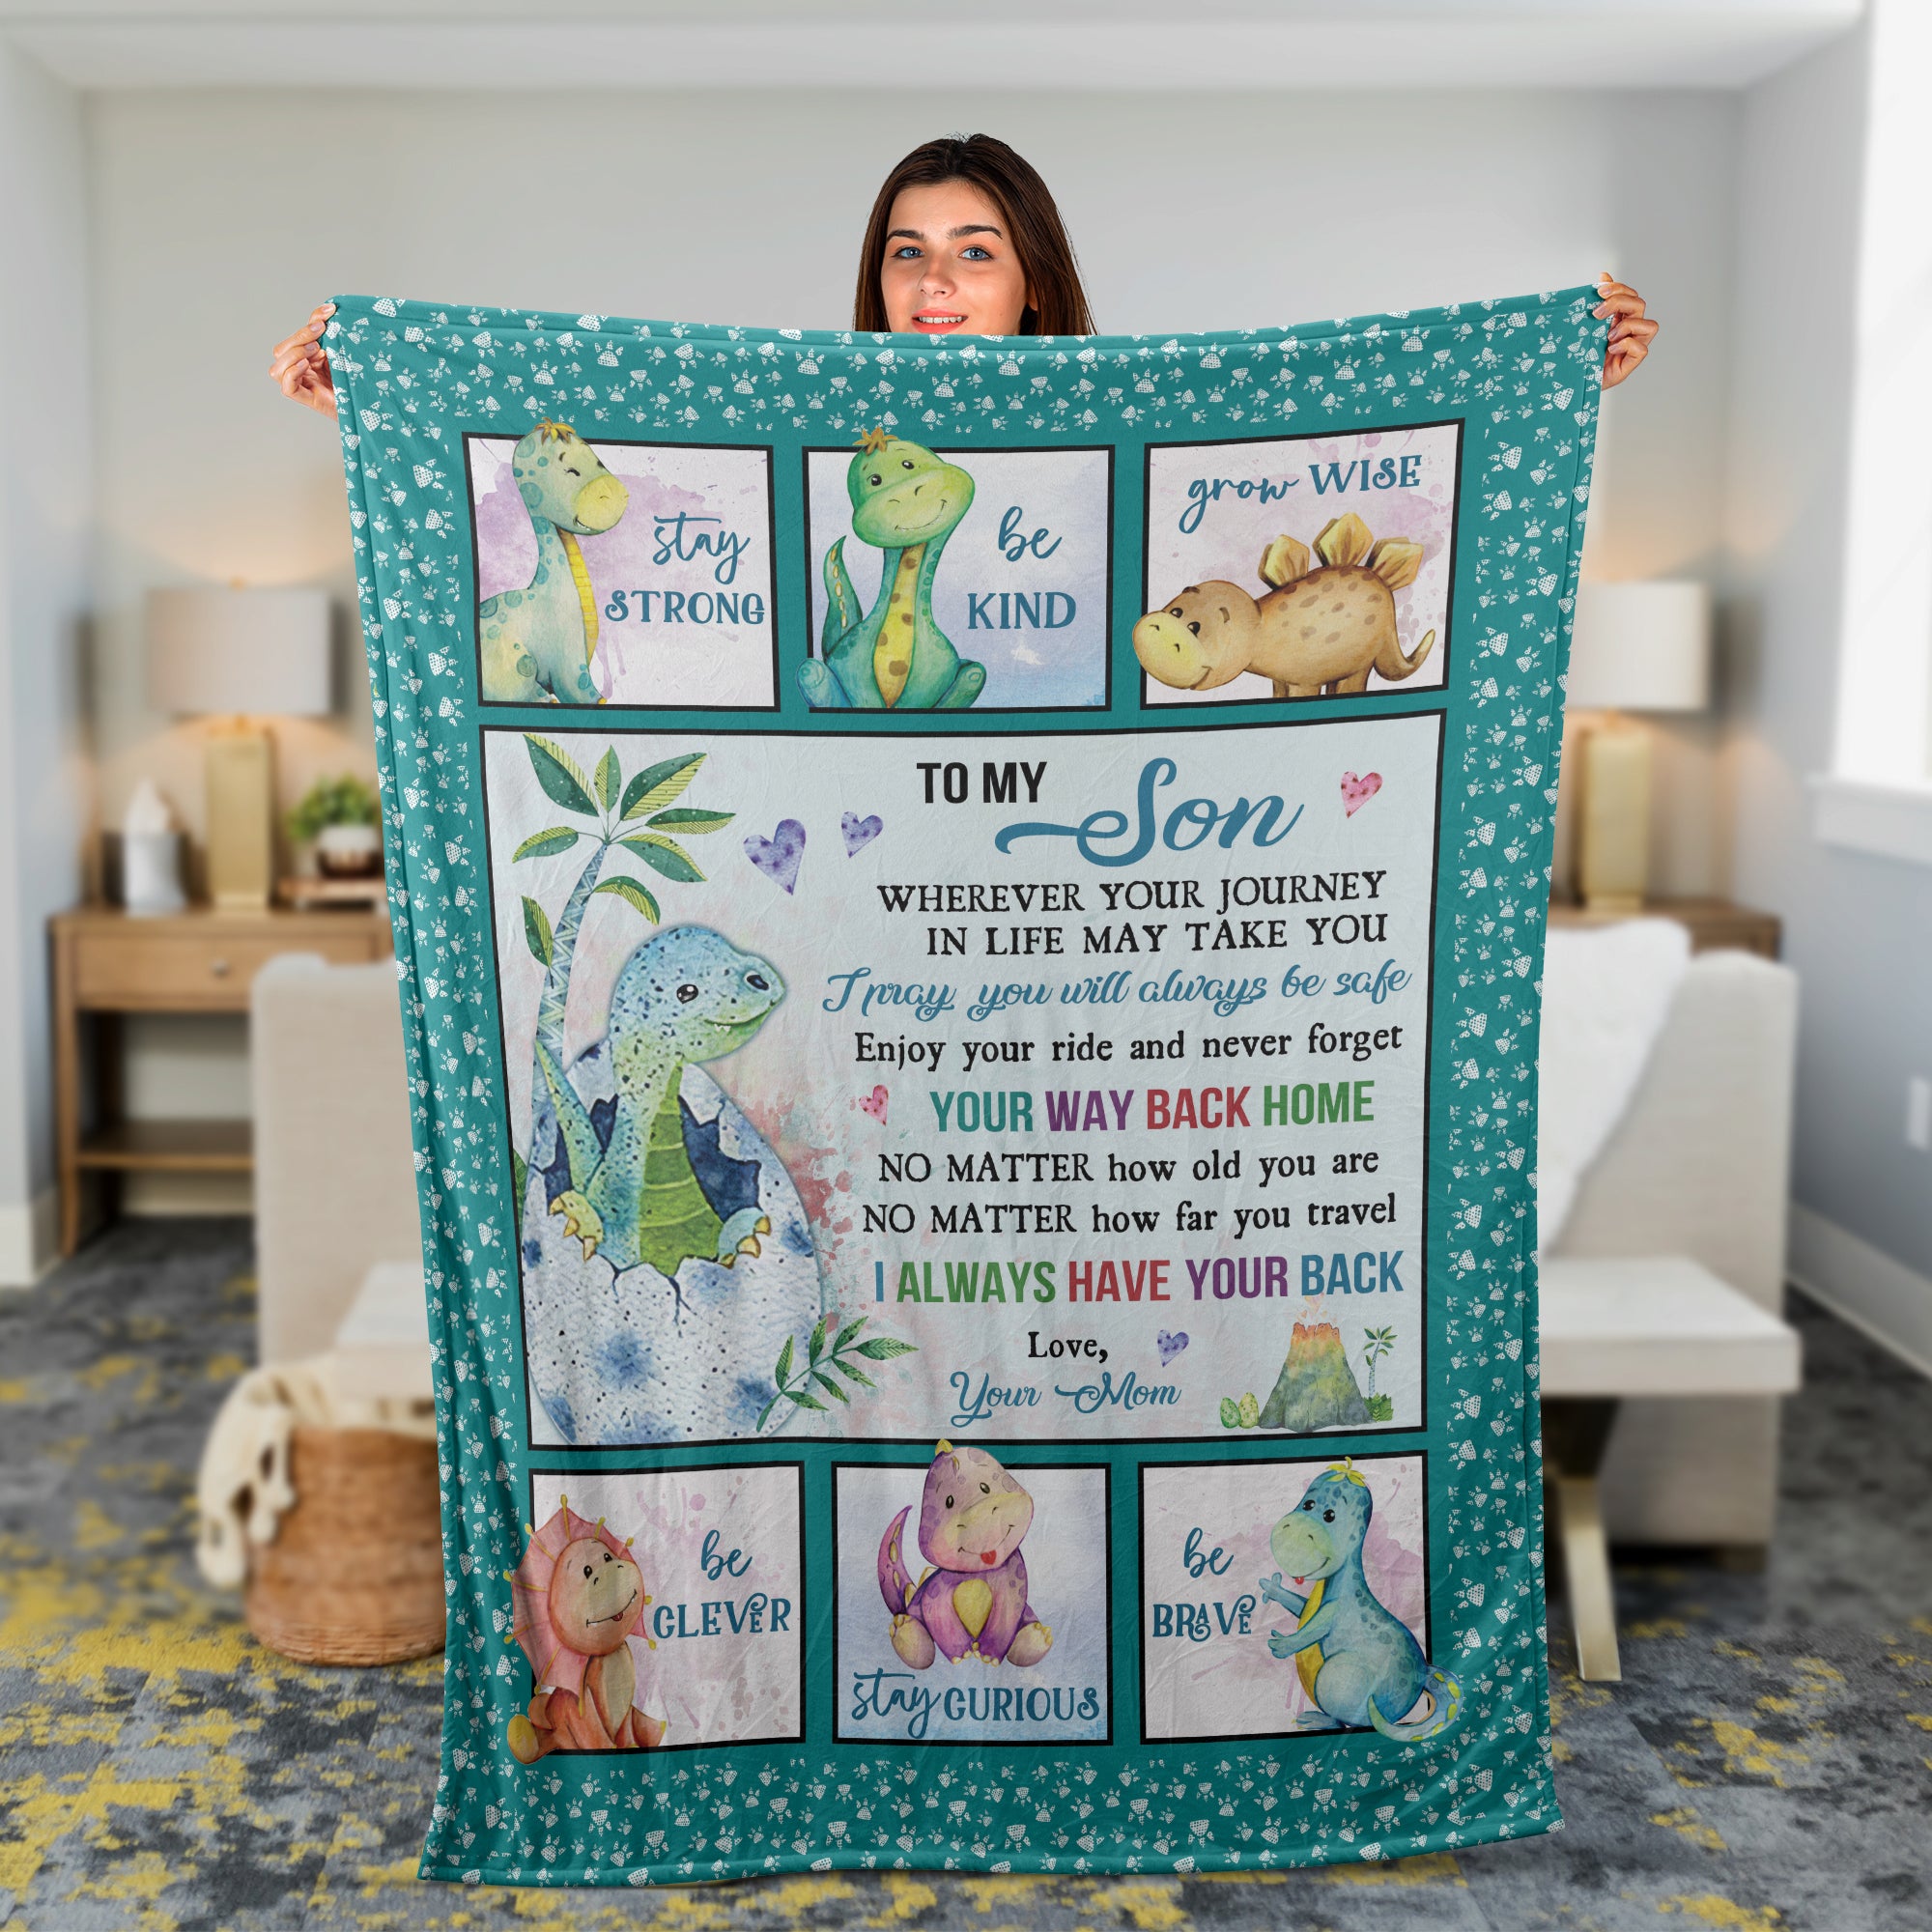 Family Blanket, Son And Mom Blanket - Gifts For Son From Mom - Mom To Son Blanket, Baby Dinosaur, I Always Have Your Back